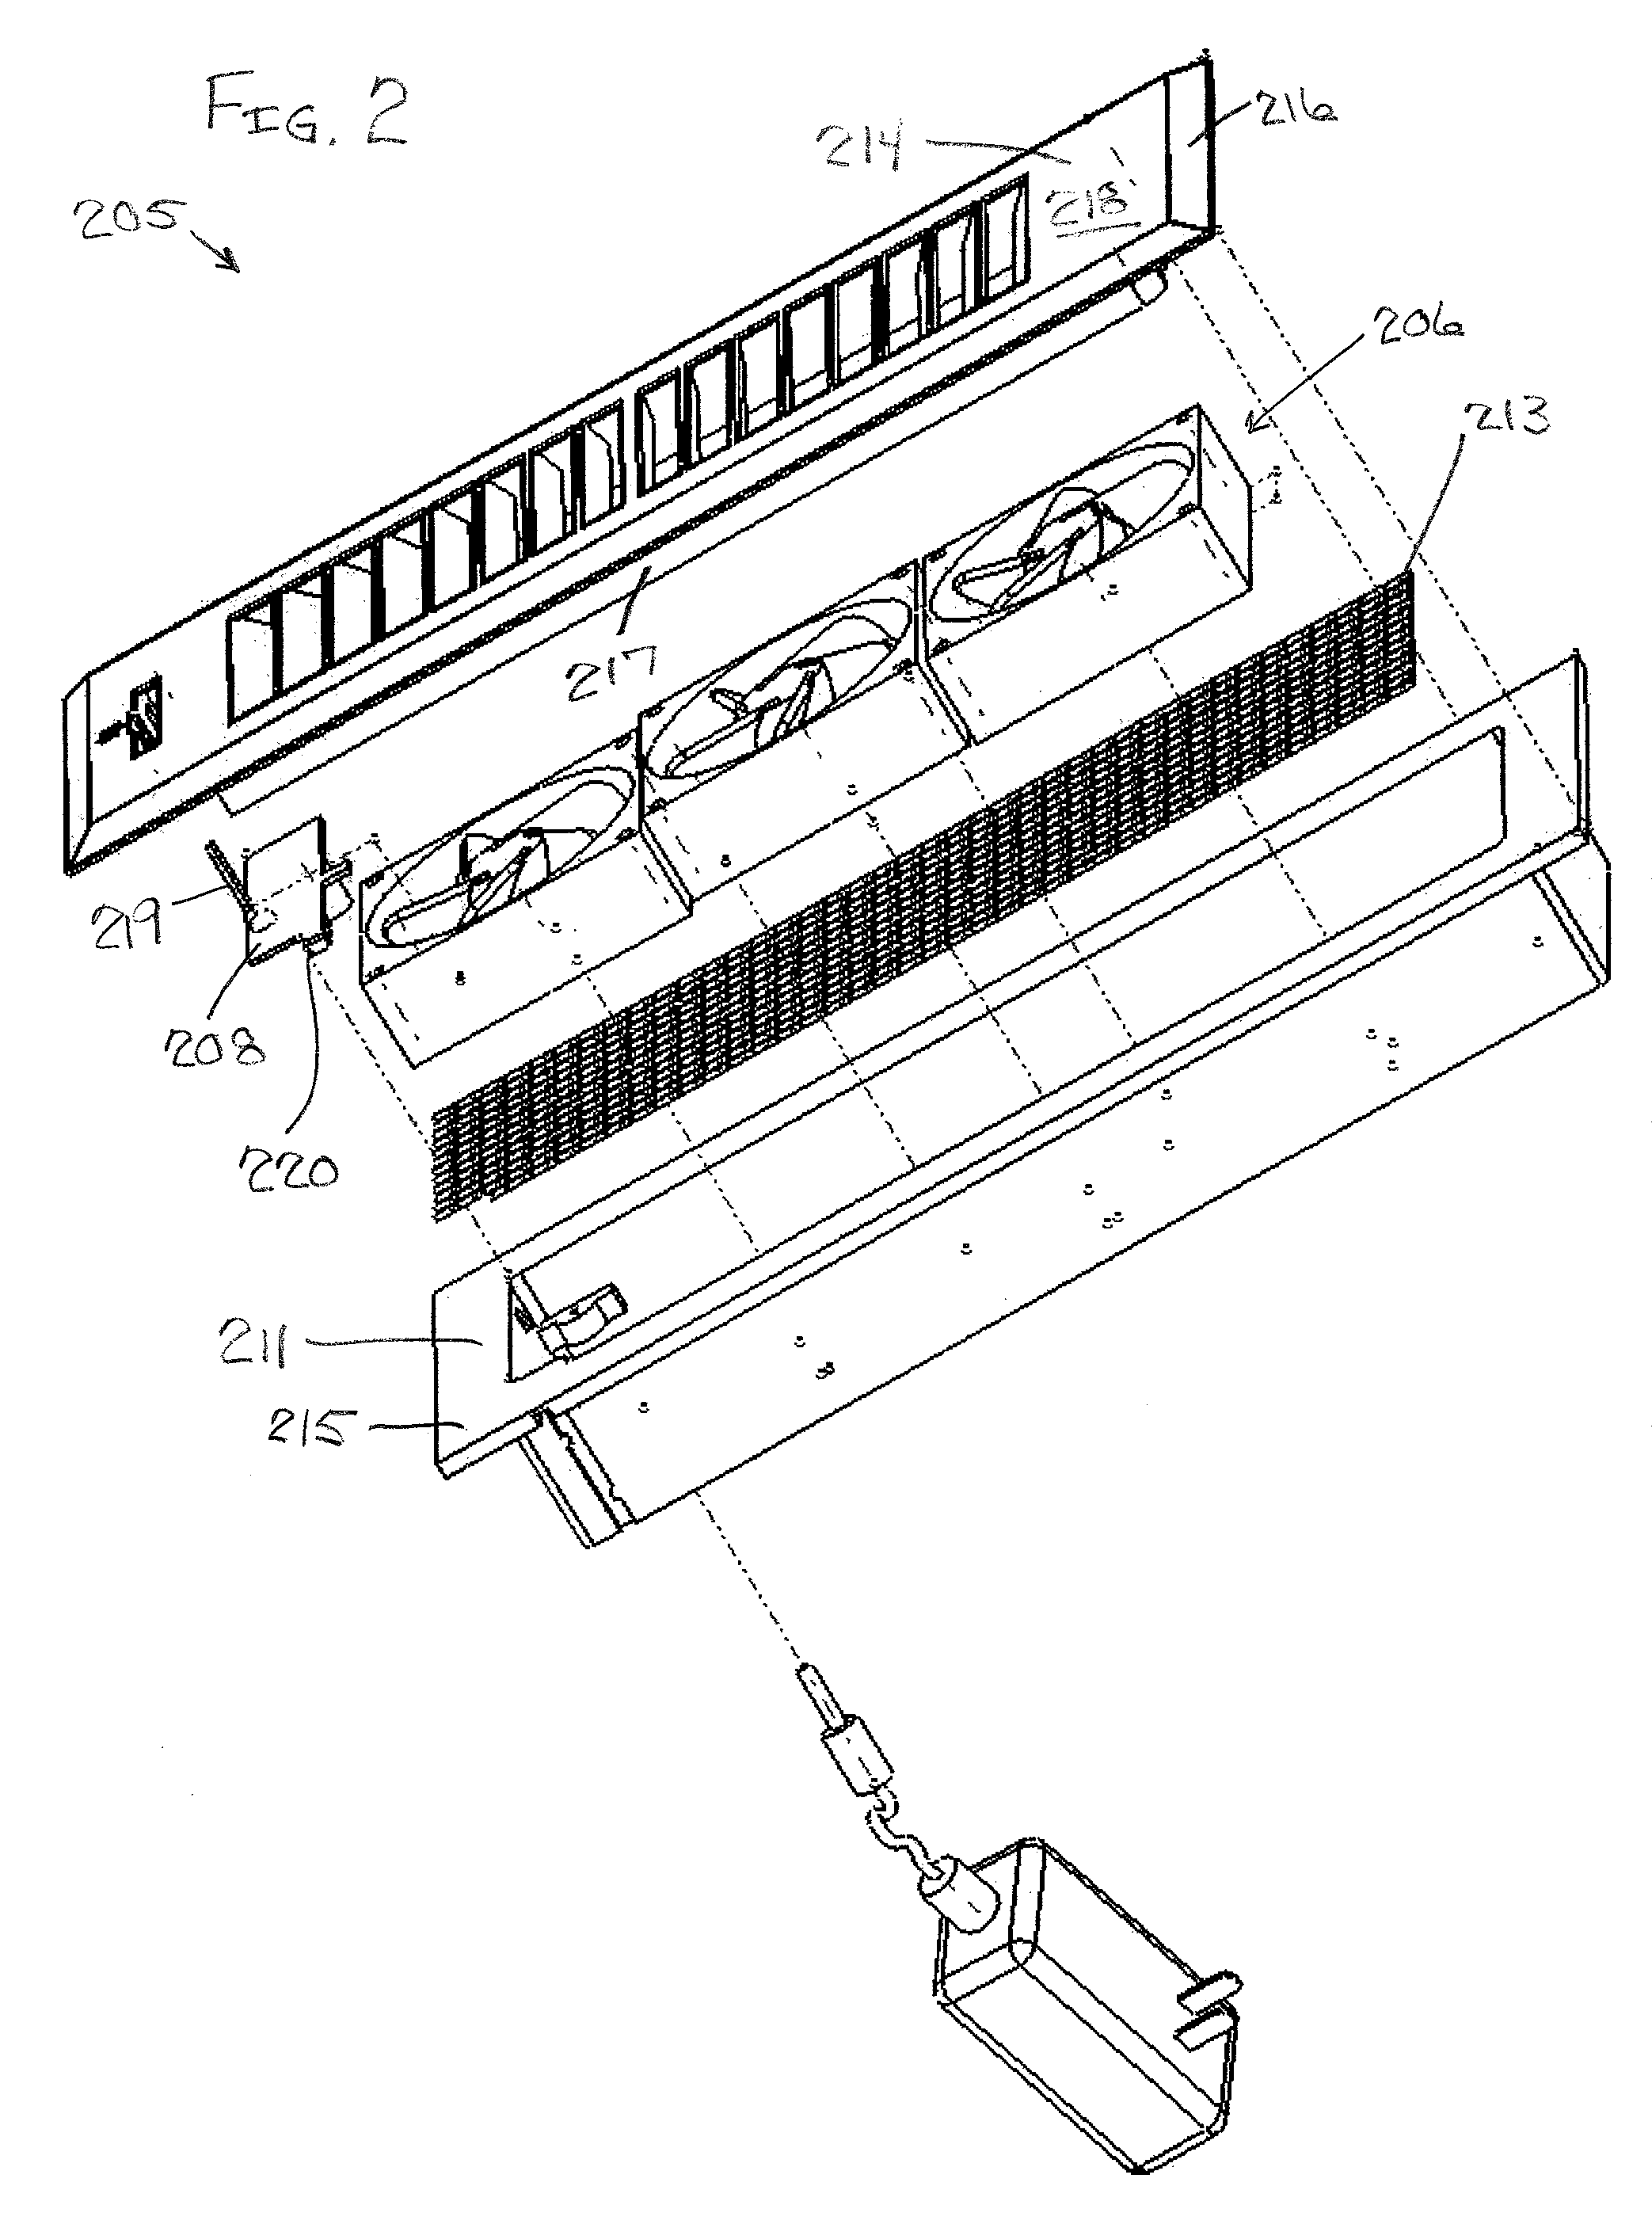 Air-conditioning register assembly and method